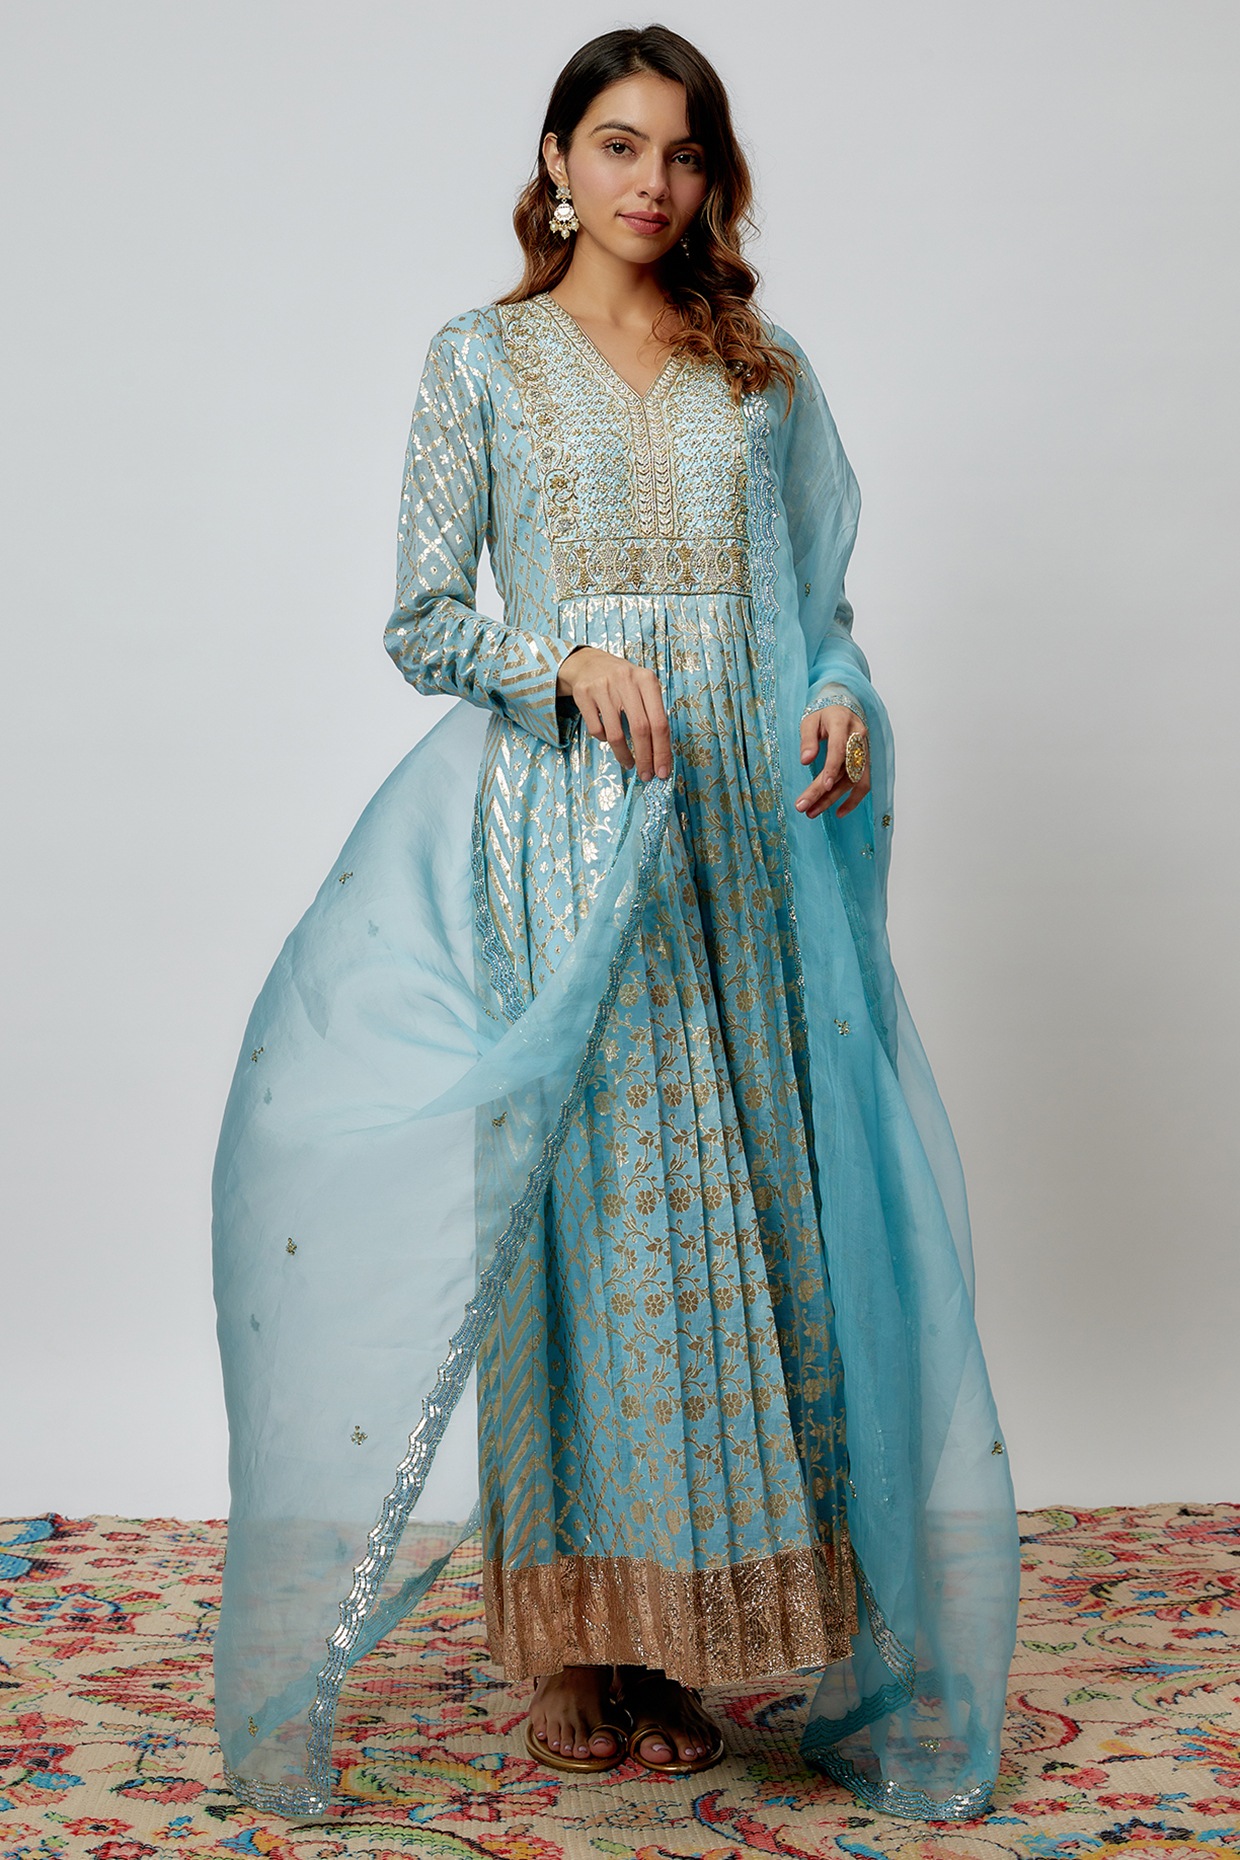 Riiti Fashions - Designing Dreams - Riiti Fashions, Navy blue raw silk  anarkali-gown delicately hand embroidered. #riitika#indian formal  eveningwear#indian bridal reception#hand embroidered #anarkali#indian style  gown# cutdana tikki embroidery#gold ...